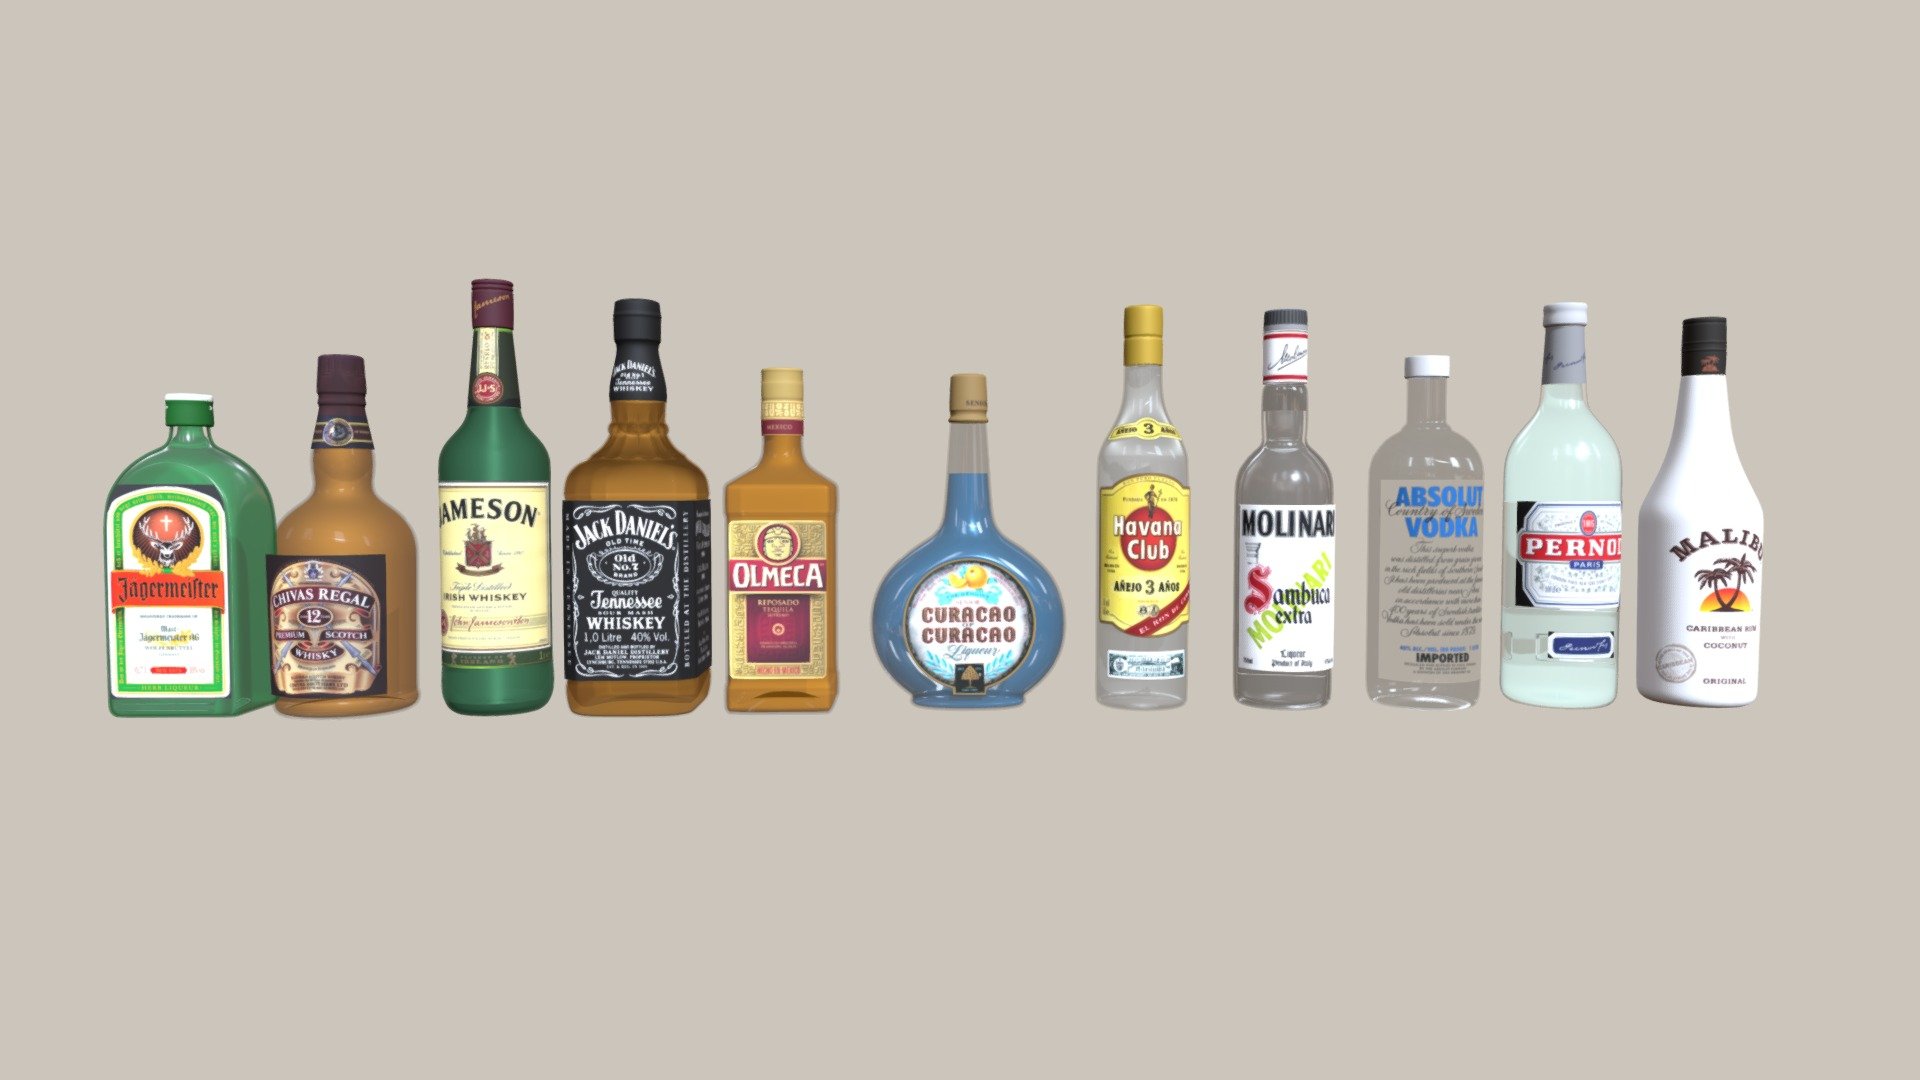 Pack Alcohol Bottles : Jagermeister / Chivas / Jameson / Jack Daniel's / Olmeca / Curacao / Havana club / Molinary / Absolute Vodka / Pernod / Malibu

Download features:

FBX, file format

Optimized UV layout

Textures (shown here - included in download)

Textures in JPG

Download size : 18 MB

Mesh properties :

Optimised poly count

Topology model is OK

Scale is OK - Pack Alcohol Bottle - Buy Royalty Free 3D model by shenronstudio 3d model